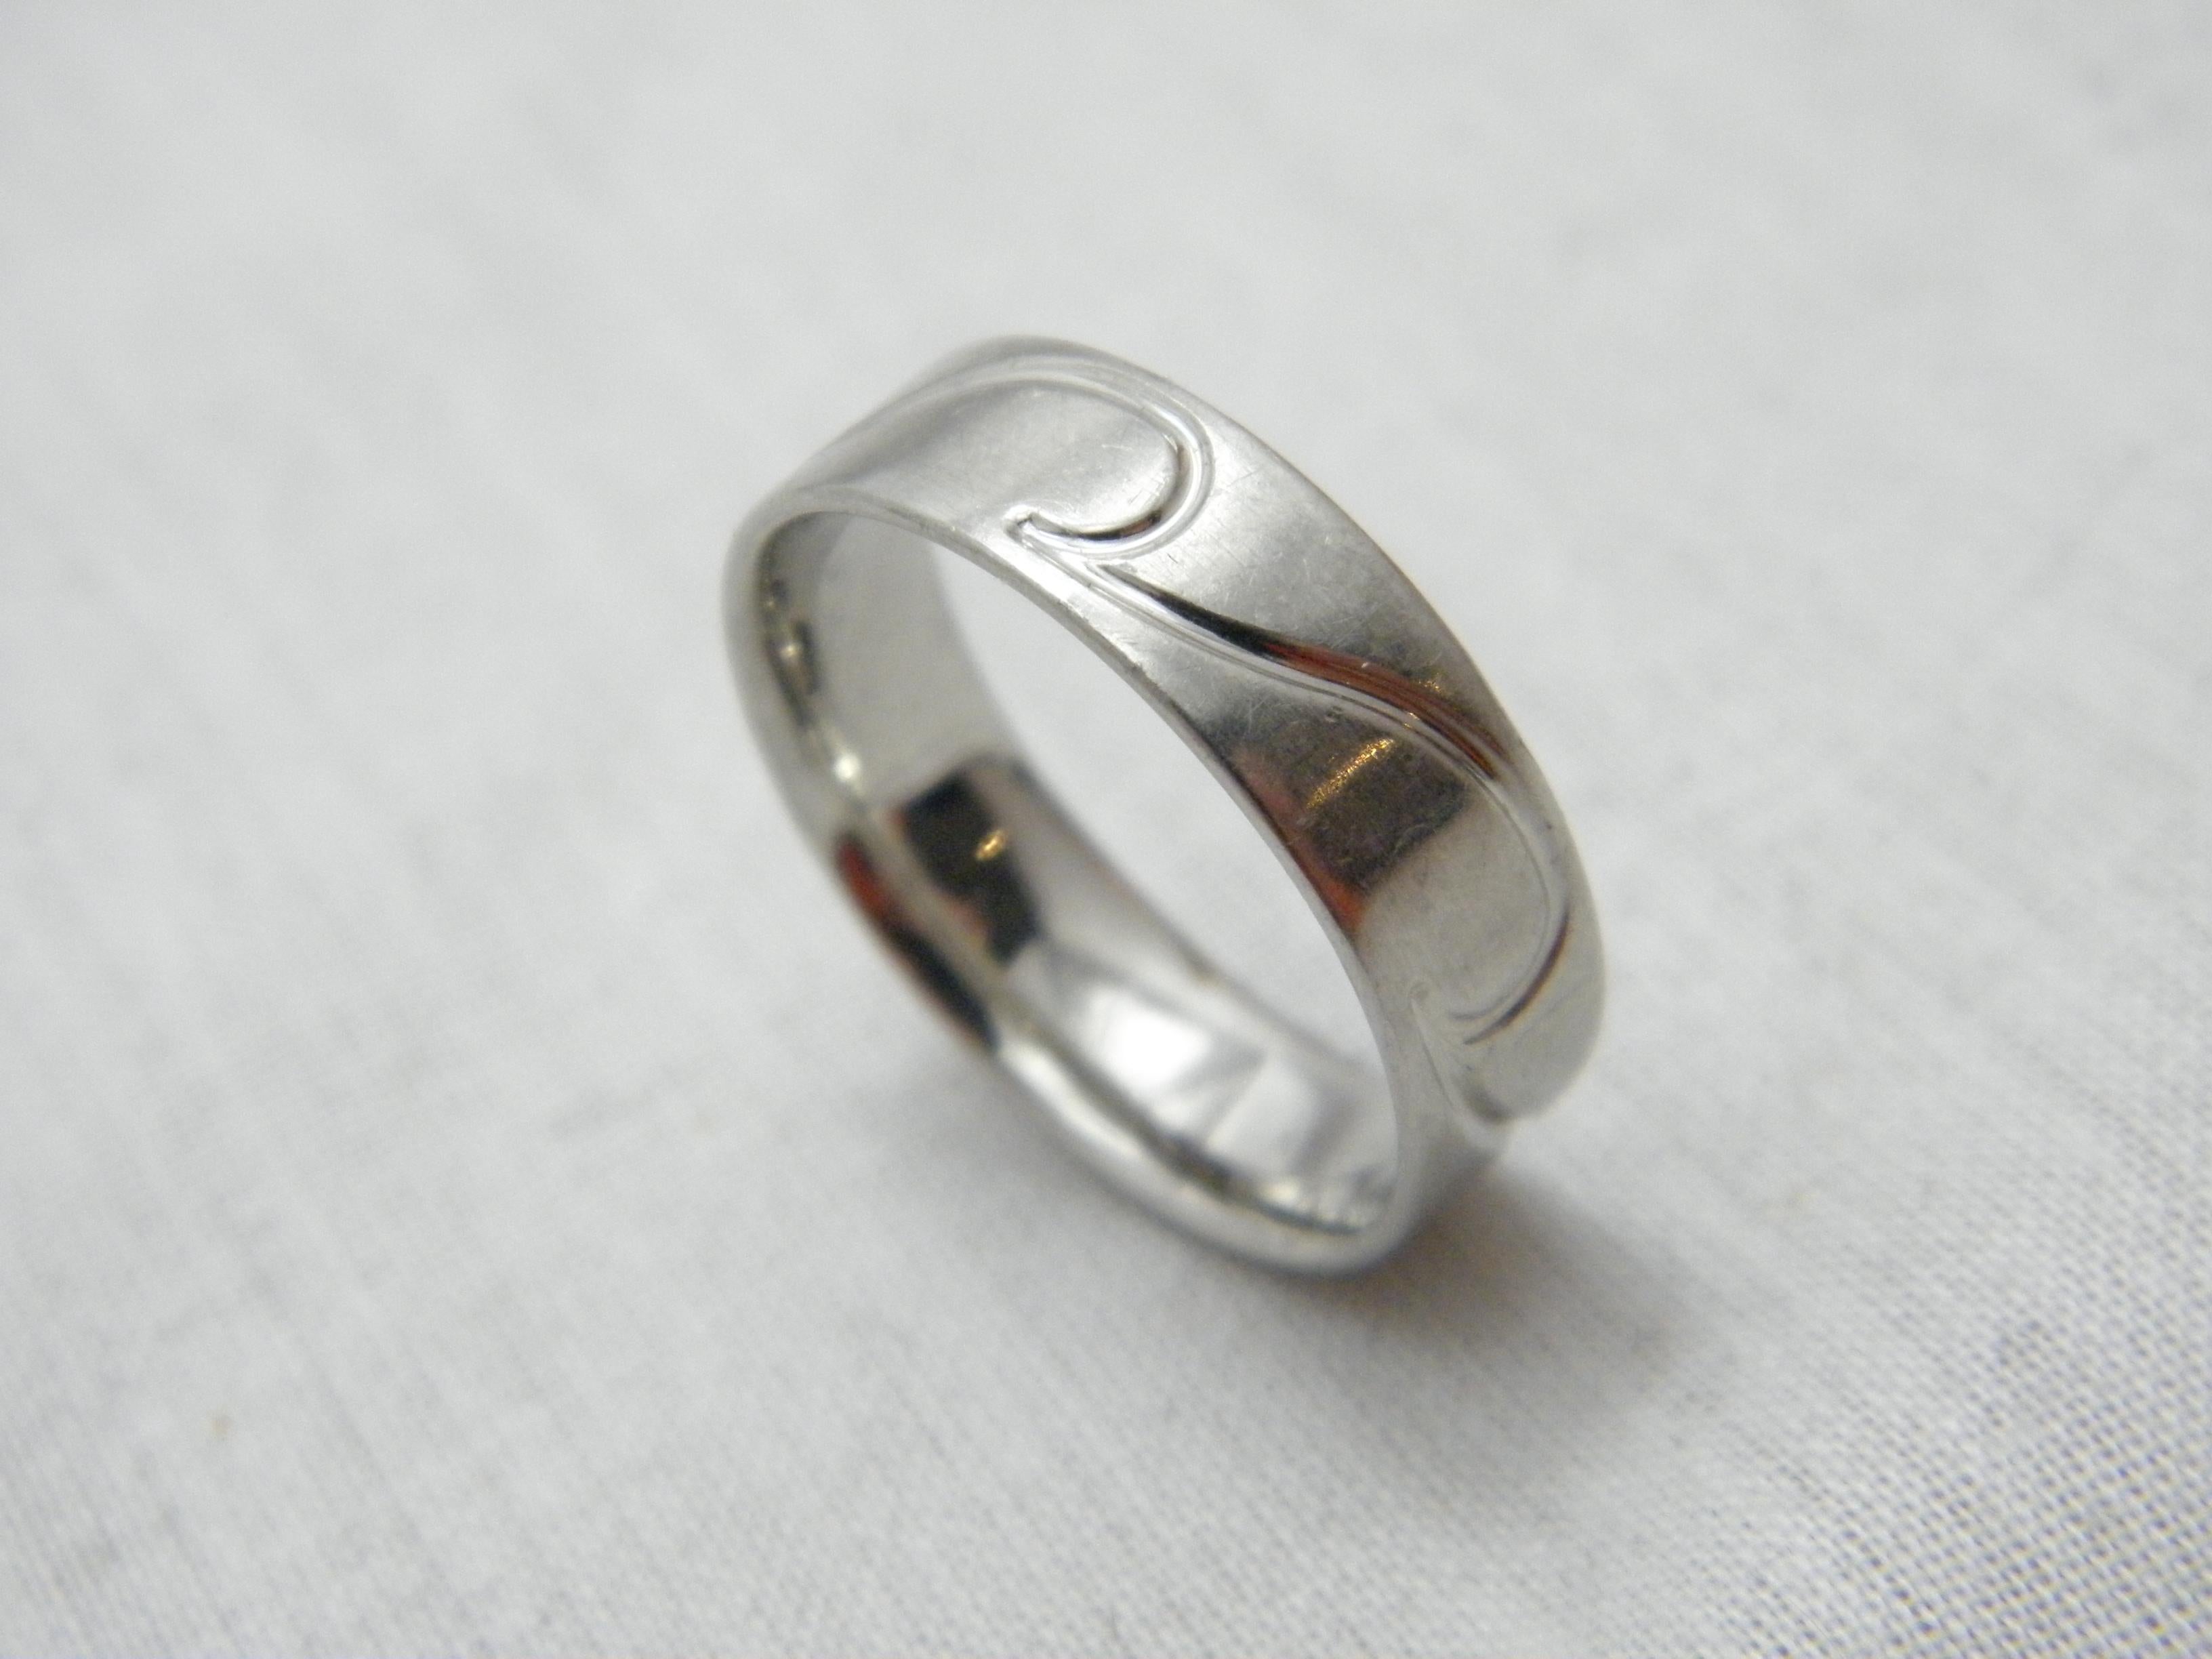 Vintage Tiffany Palladium 6.2mm Wave Ring Size Q1/2 8.5 950 Purity Band T&Co For Sale 2